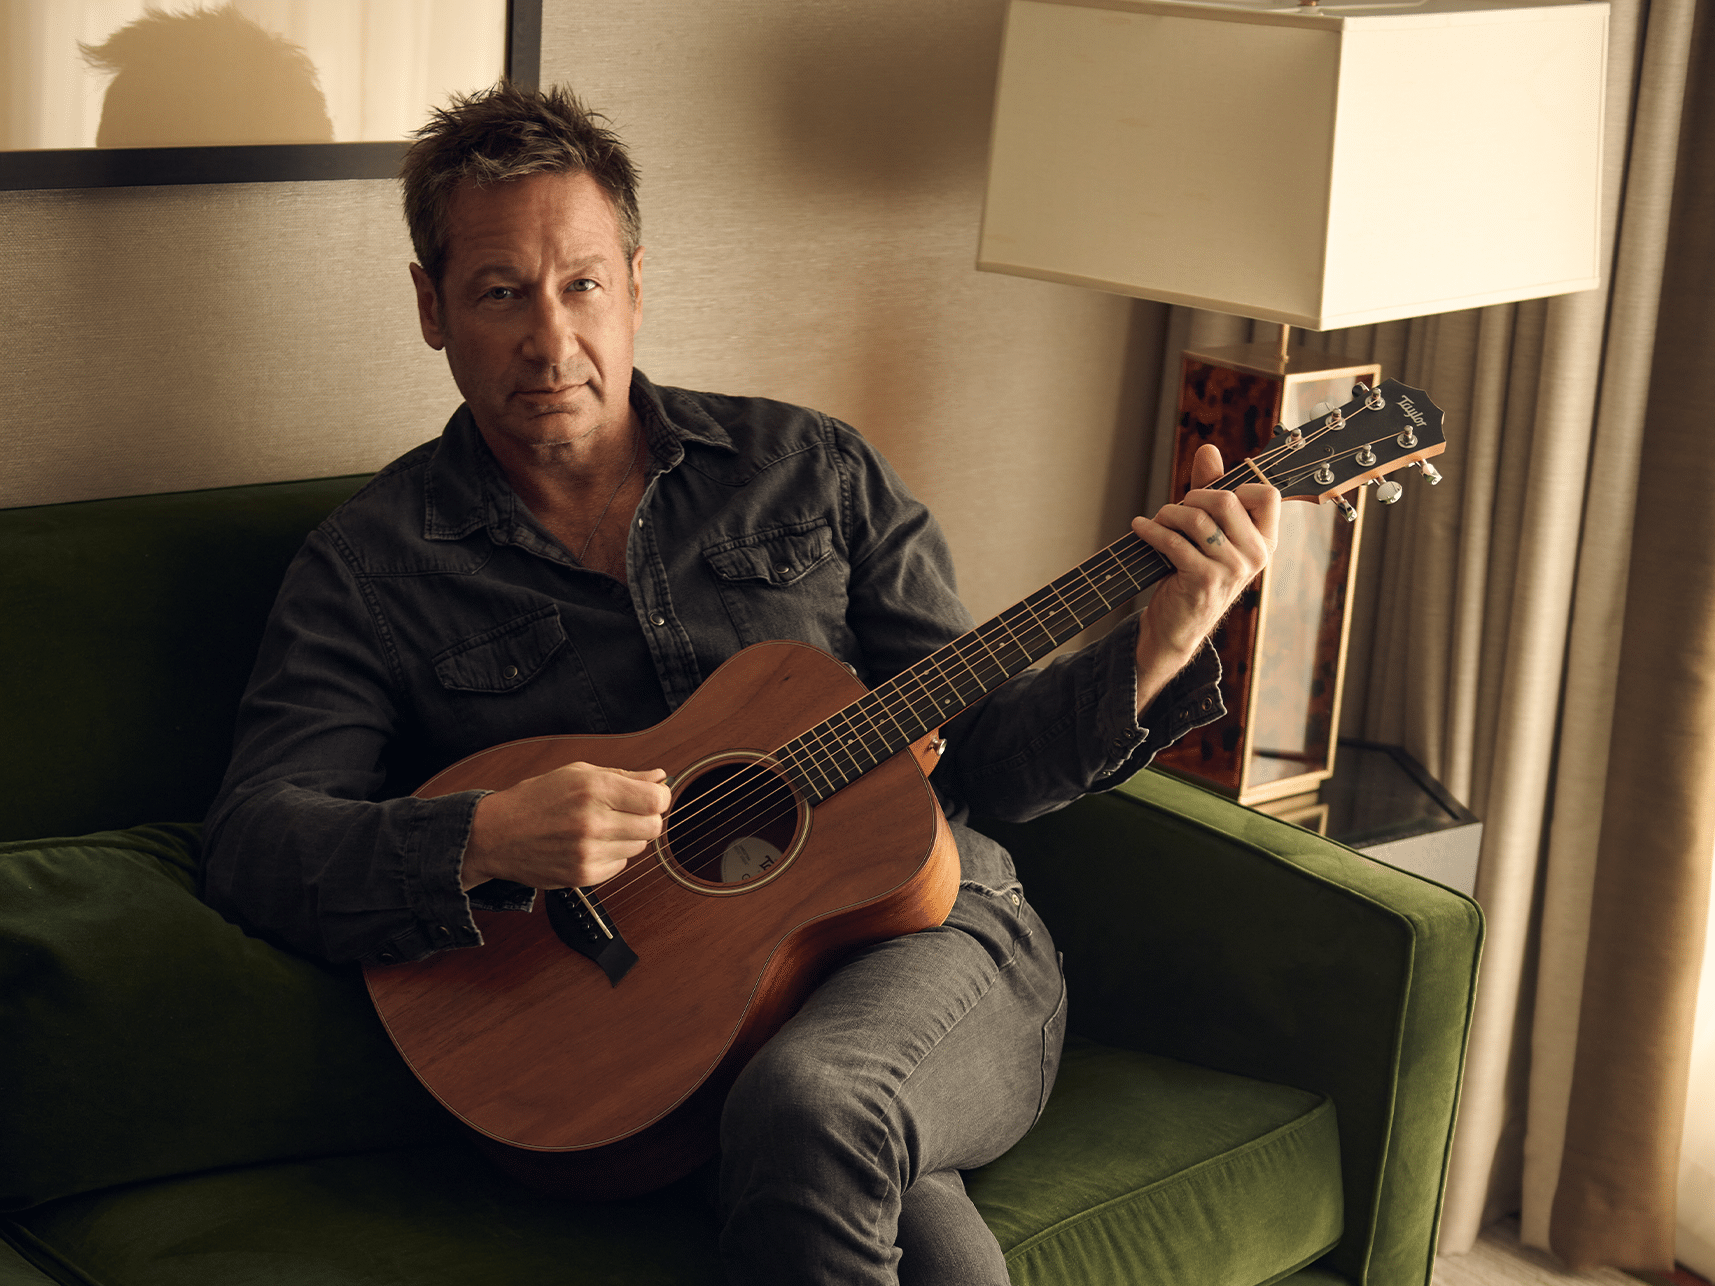 David Duchovny holding an acoustic guitar, sitting on a green sofa